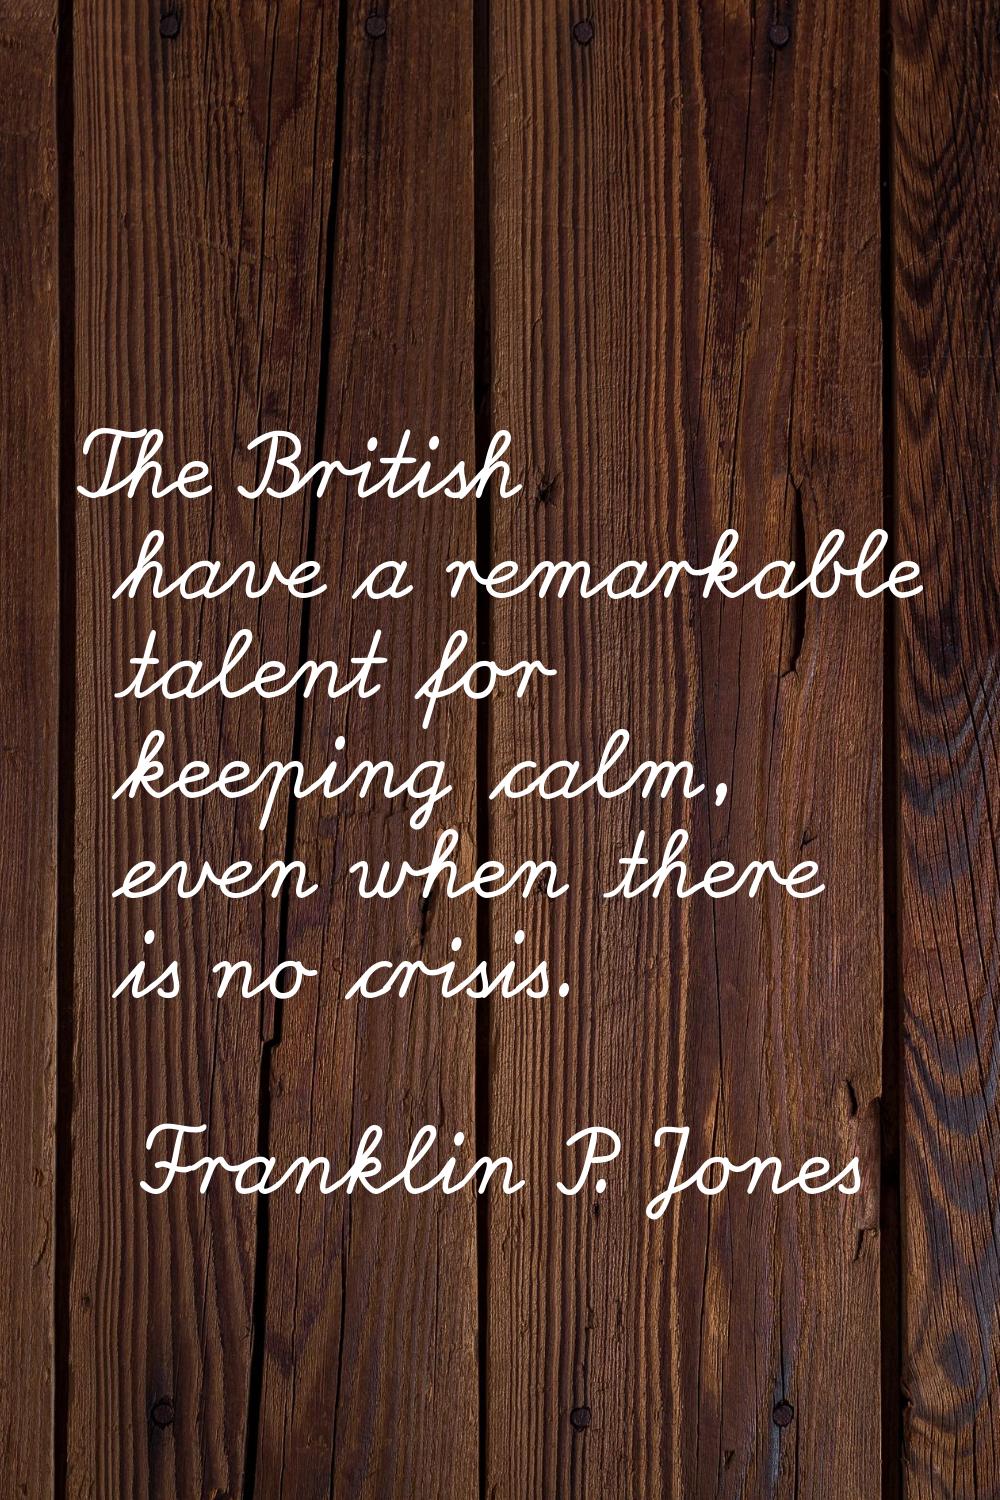 The British have a remarkable talent for keeping calm, even when there is no crisis.